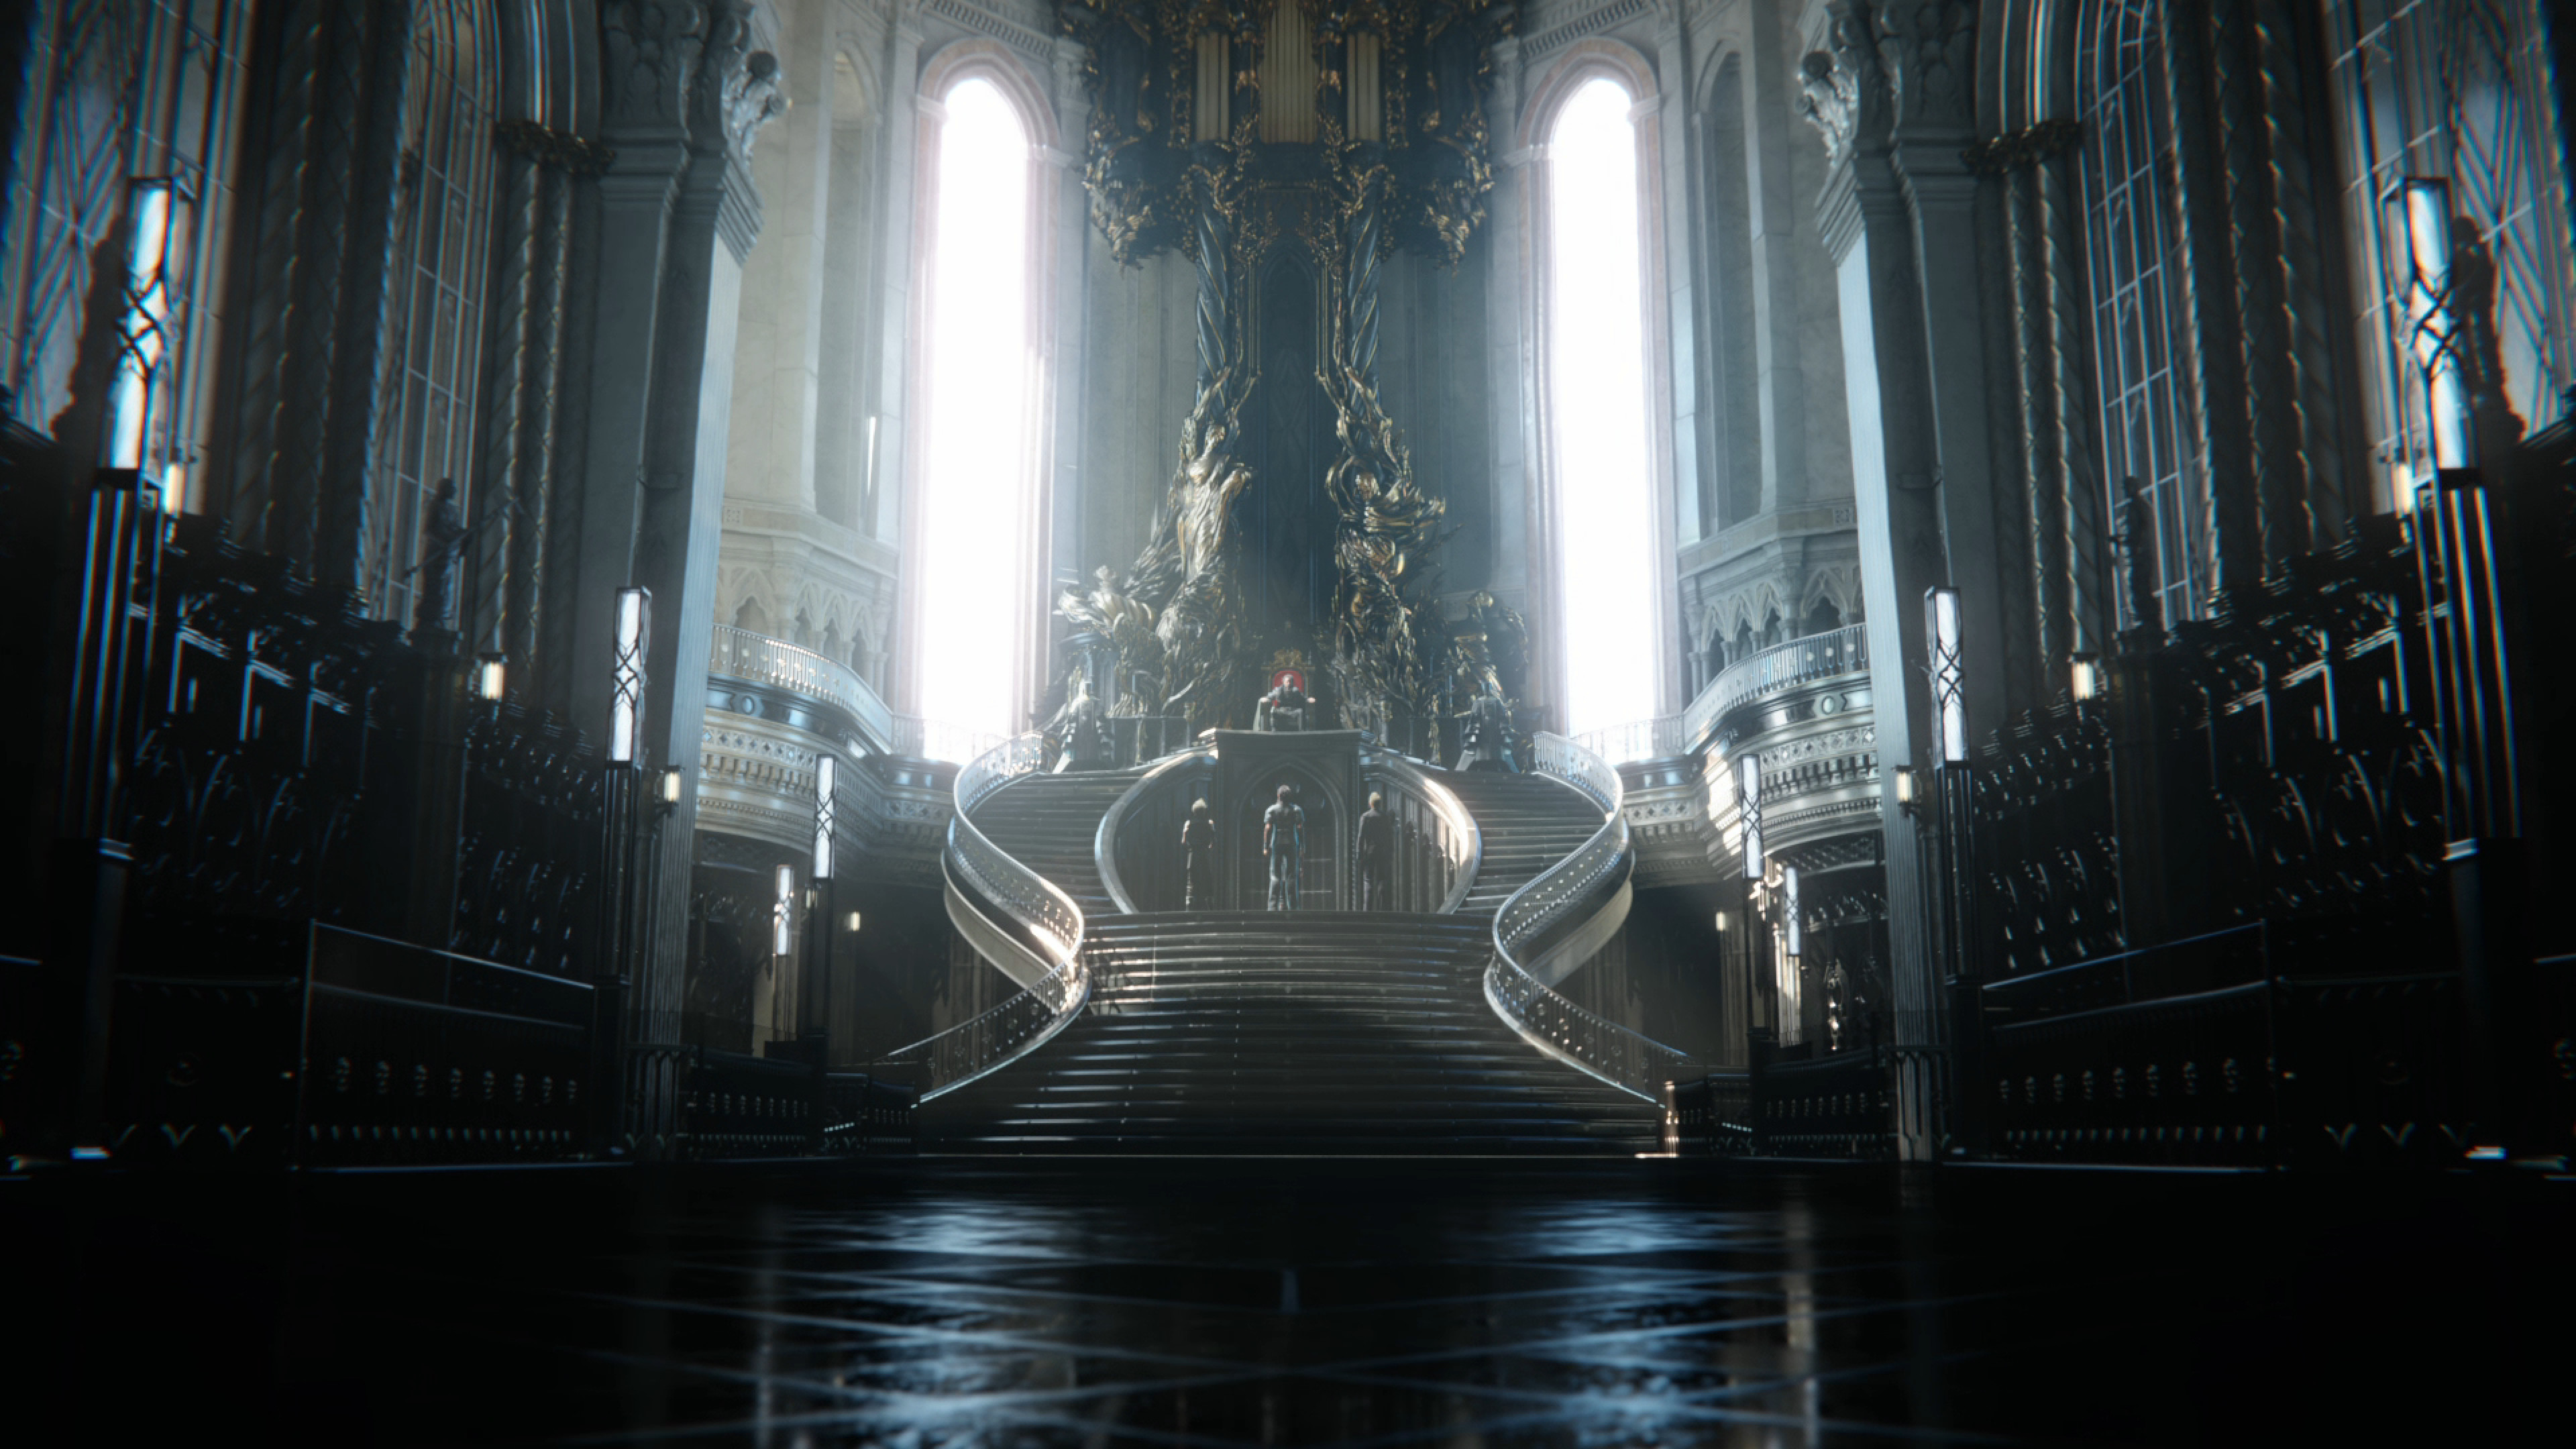 3840x2160 I completed my first Final Fantasy title. The game featured beautiful  cinematography, so I captured some stills as I played through the story.  Enjoy!